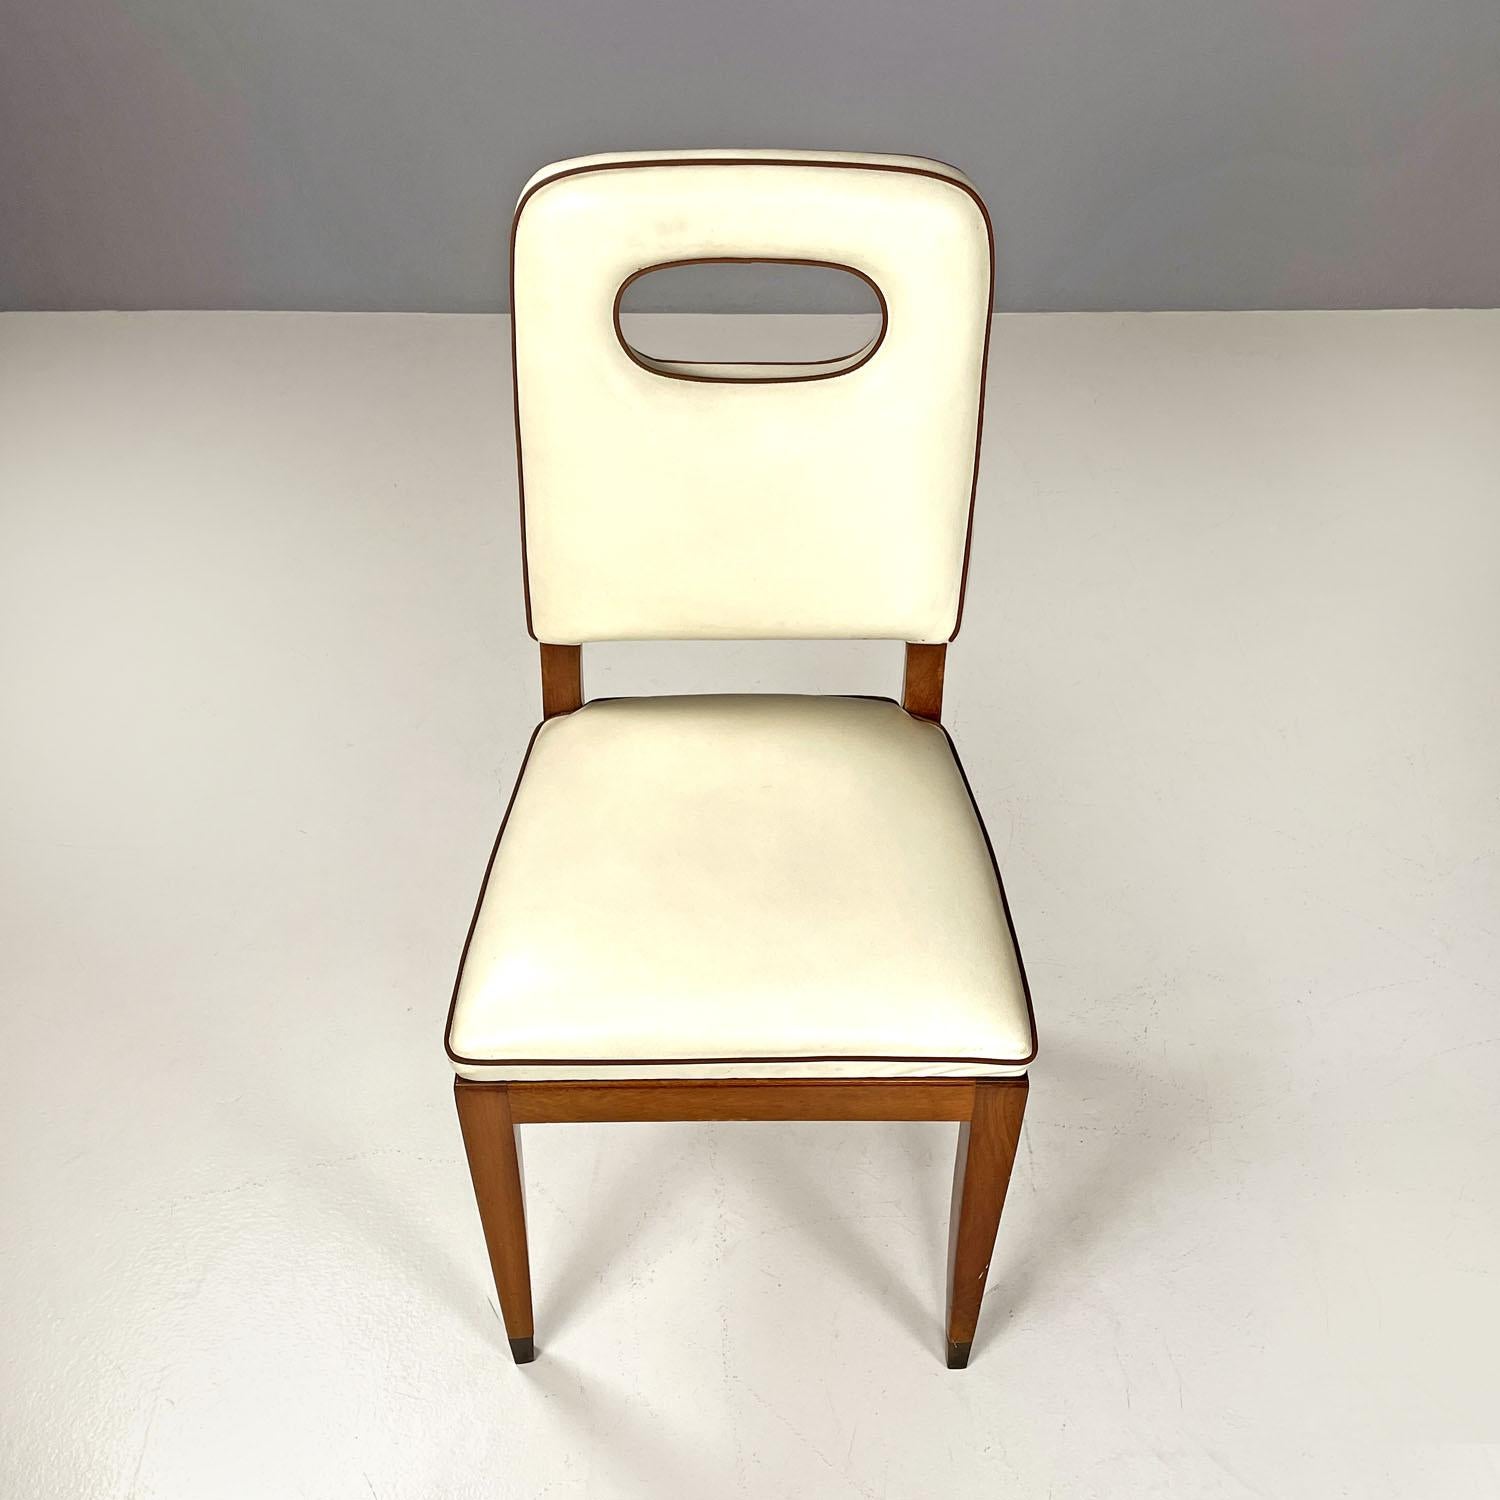 Italian Art Deco white leather and wood chairs by Giovanni Gariboldi, 1940s For Sale 1